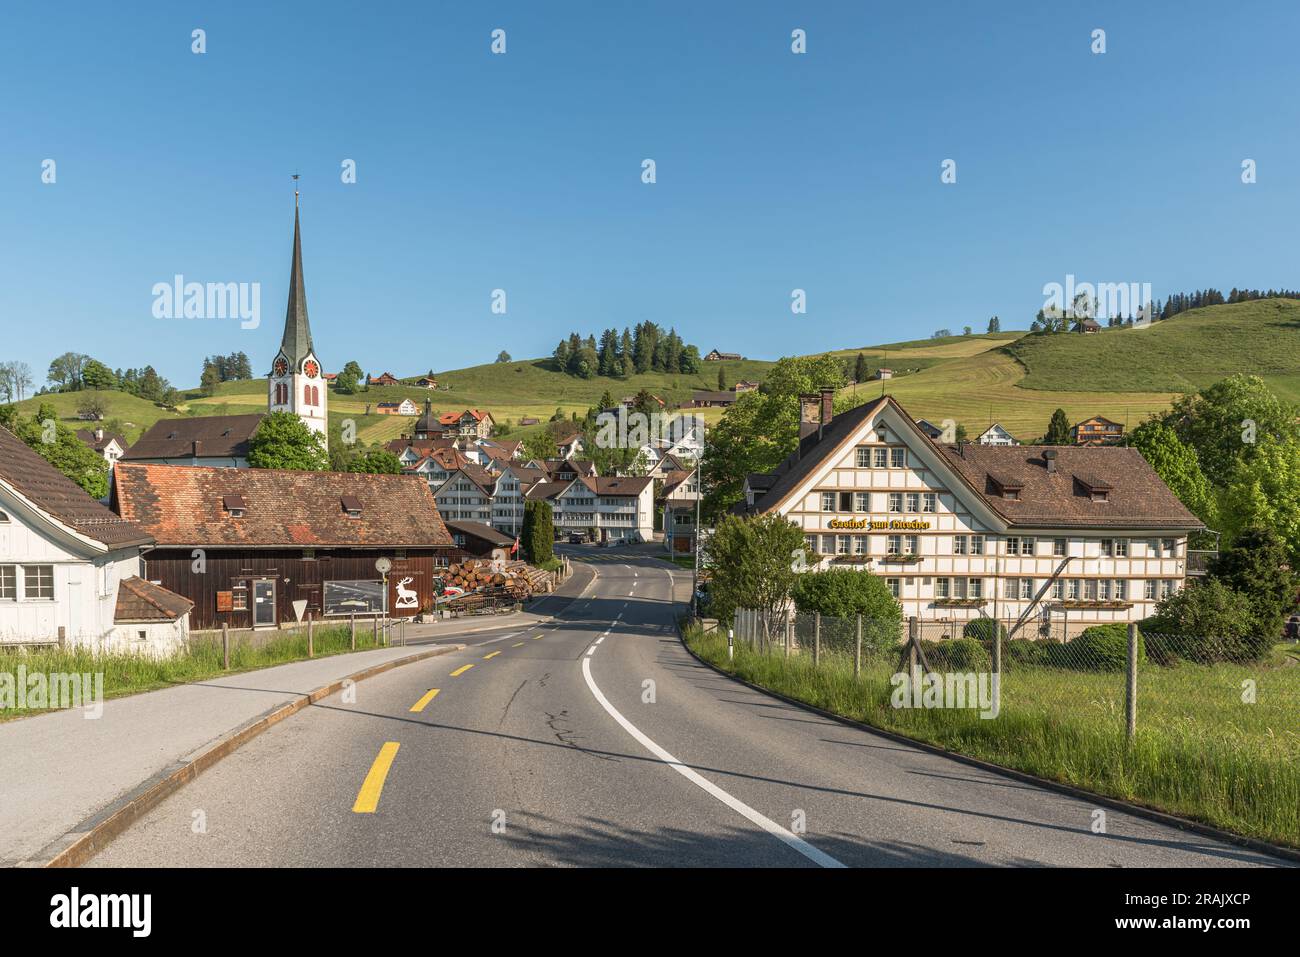 The village of Gais with traditional Appenzell houses and church, Gais, Appenzell Ausserrhoden, Switzerland Stock Photo